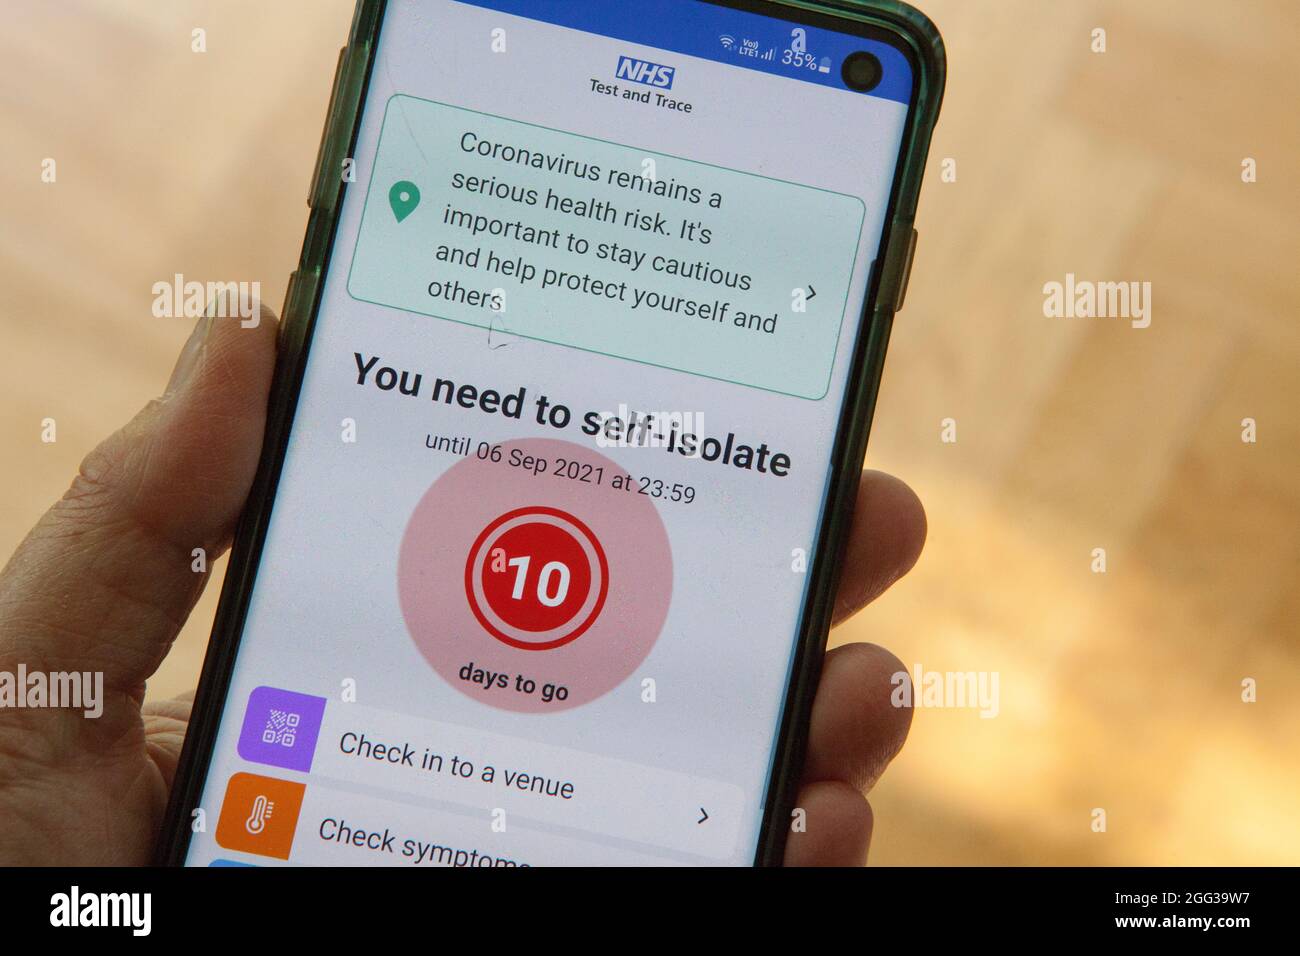 London, UK, 28 August 2021: With over 230,000 people per week testing positive for coronavirus in the UK, and on average over 100 people per day dying, this NHS Covid app notification to self-isolate for 10 days is a common sight. People who have received two vaccine doses are no longer required to self-isolate. Anna Watson/Alamy Live News Stock Photo